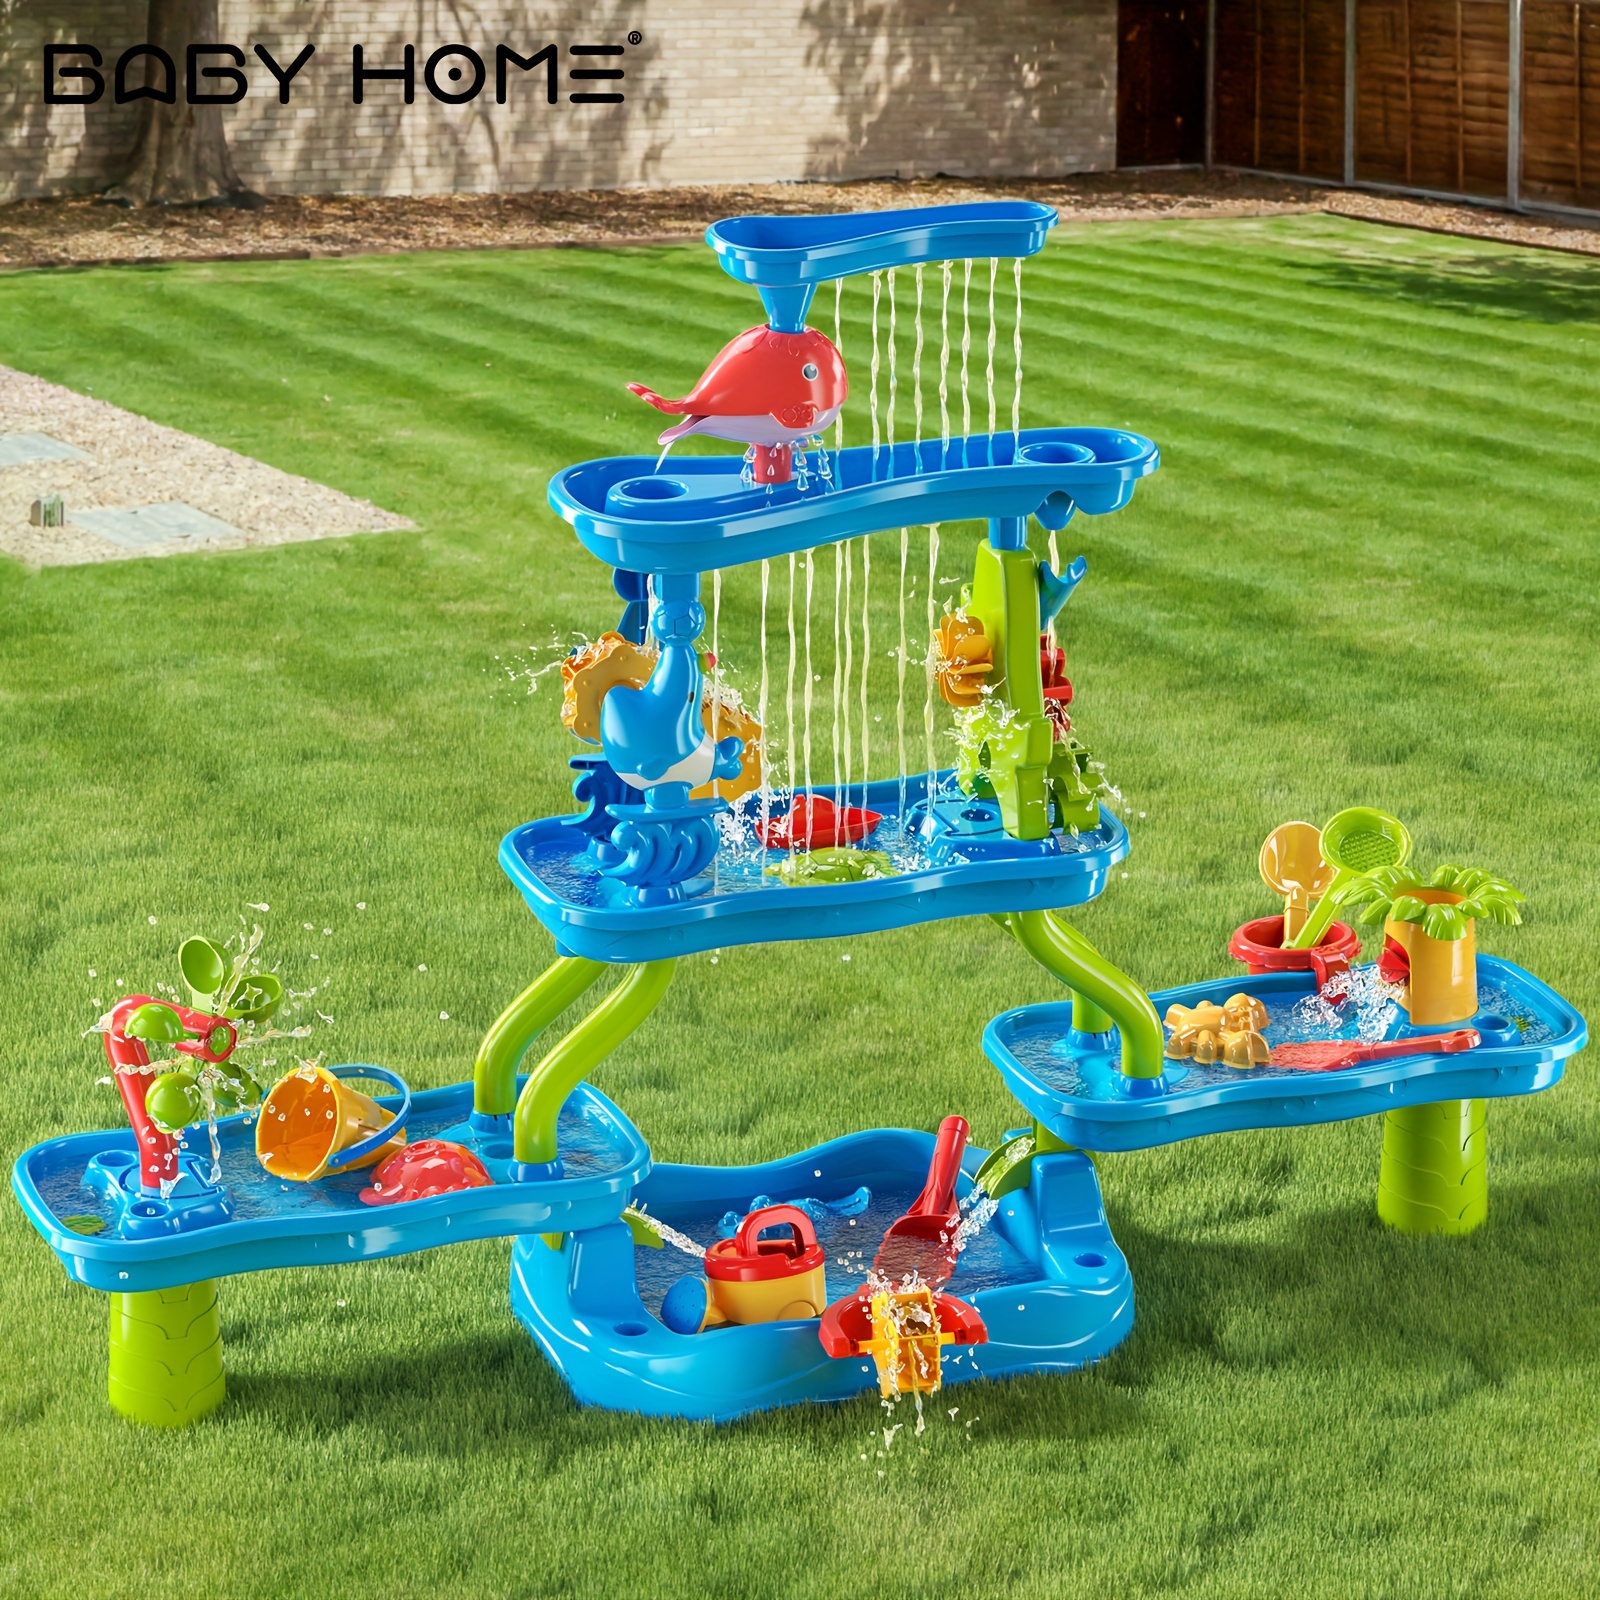 

Babyhome 5-tier Sand Water Table And Water Play Table Toys, Kids Activity Sensory Play Table For Outdoor Toy Halloween Christmas Gift